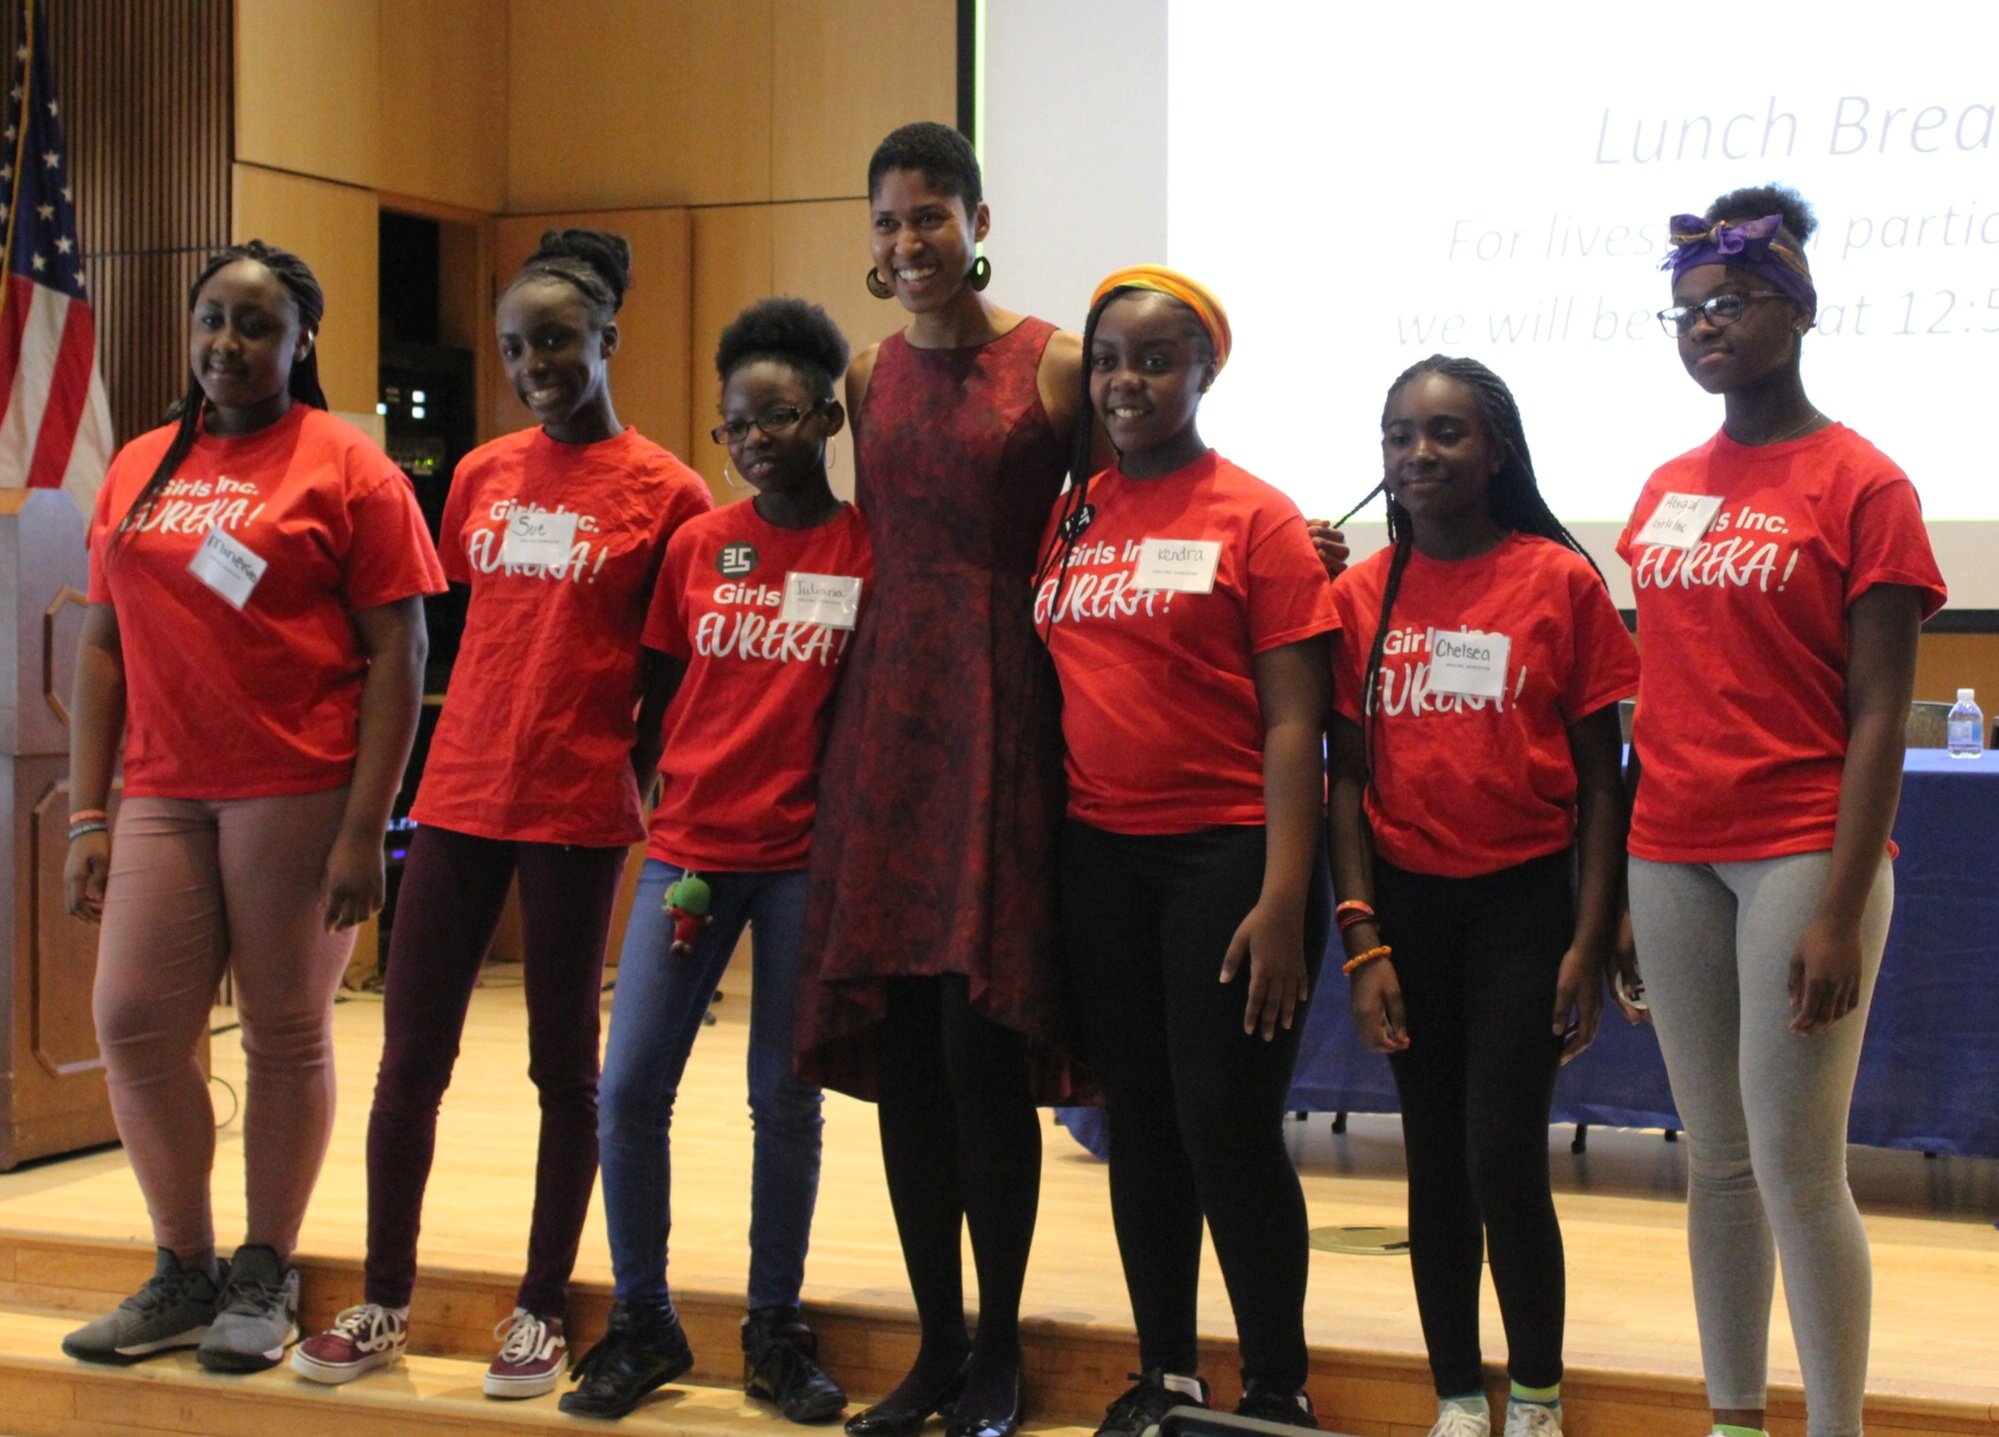 Dr. Danielle Wood with Girls Inc. Worcester